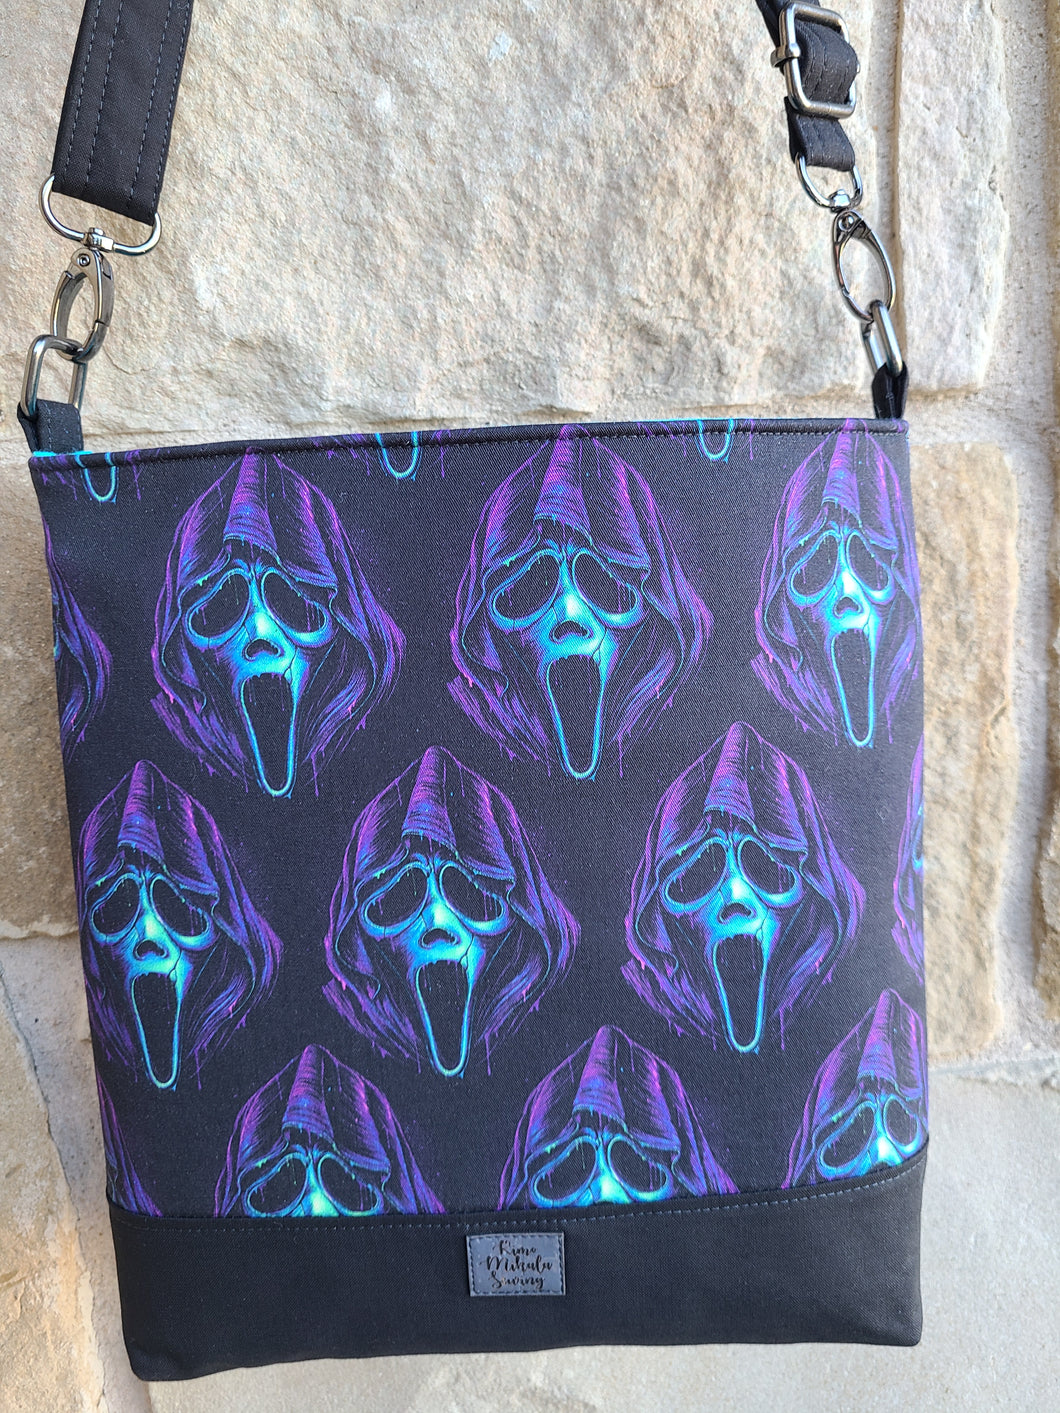 Messenger Bag Made With Scary Inspired Fabric - Adjustable Strap - Zippered Closure - Zippered Pocket - Cross Body Bag